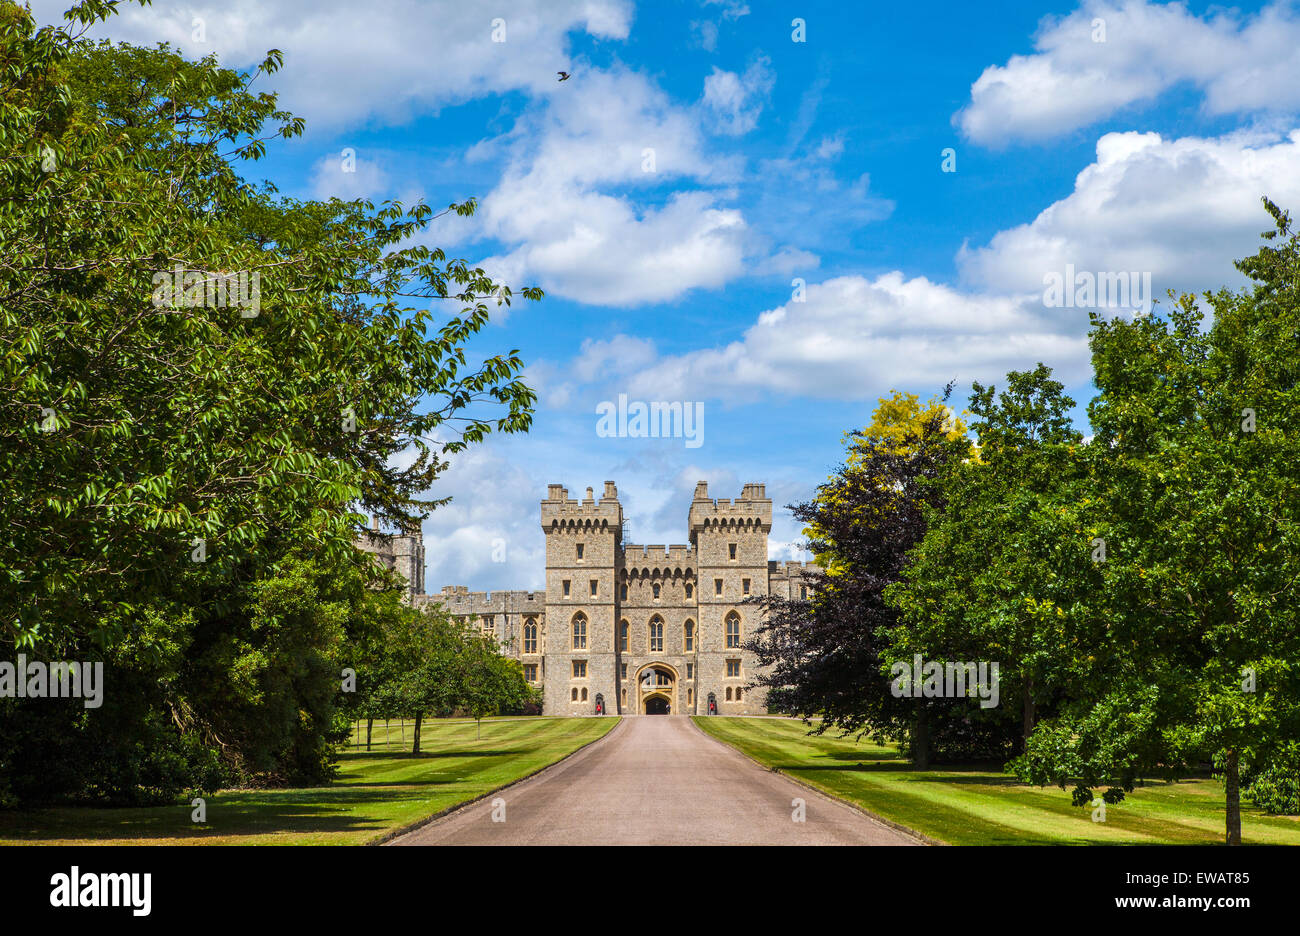 View of the entrance to Windsor Castle in Berkshire, England. Stock Photo